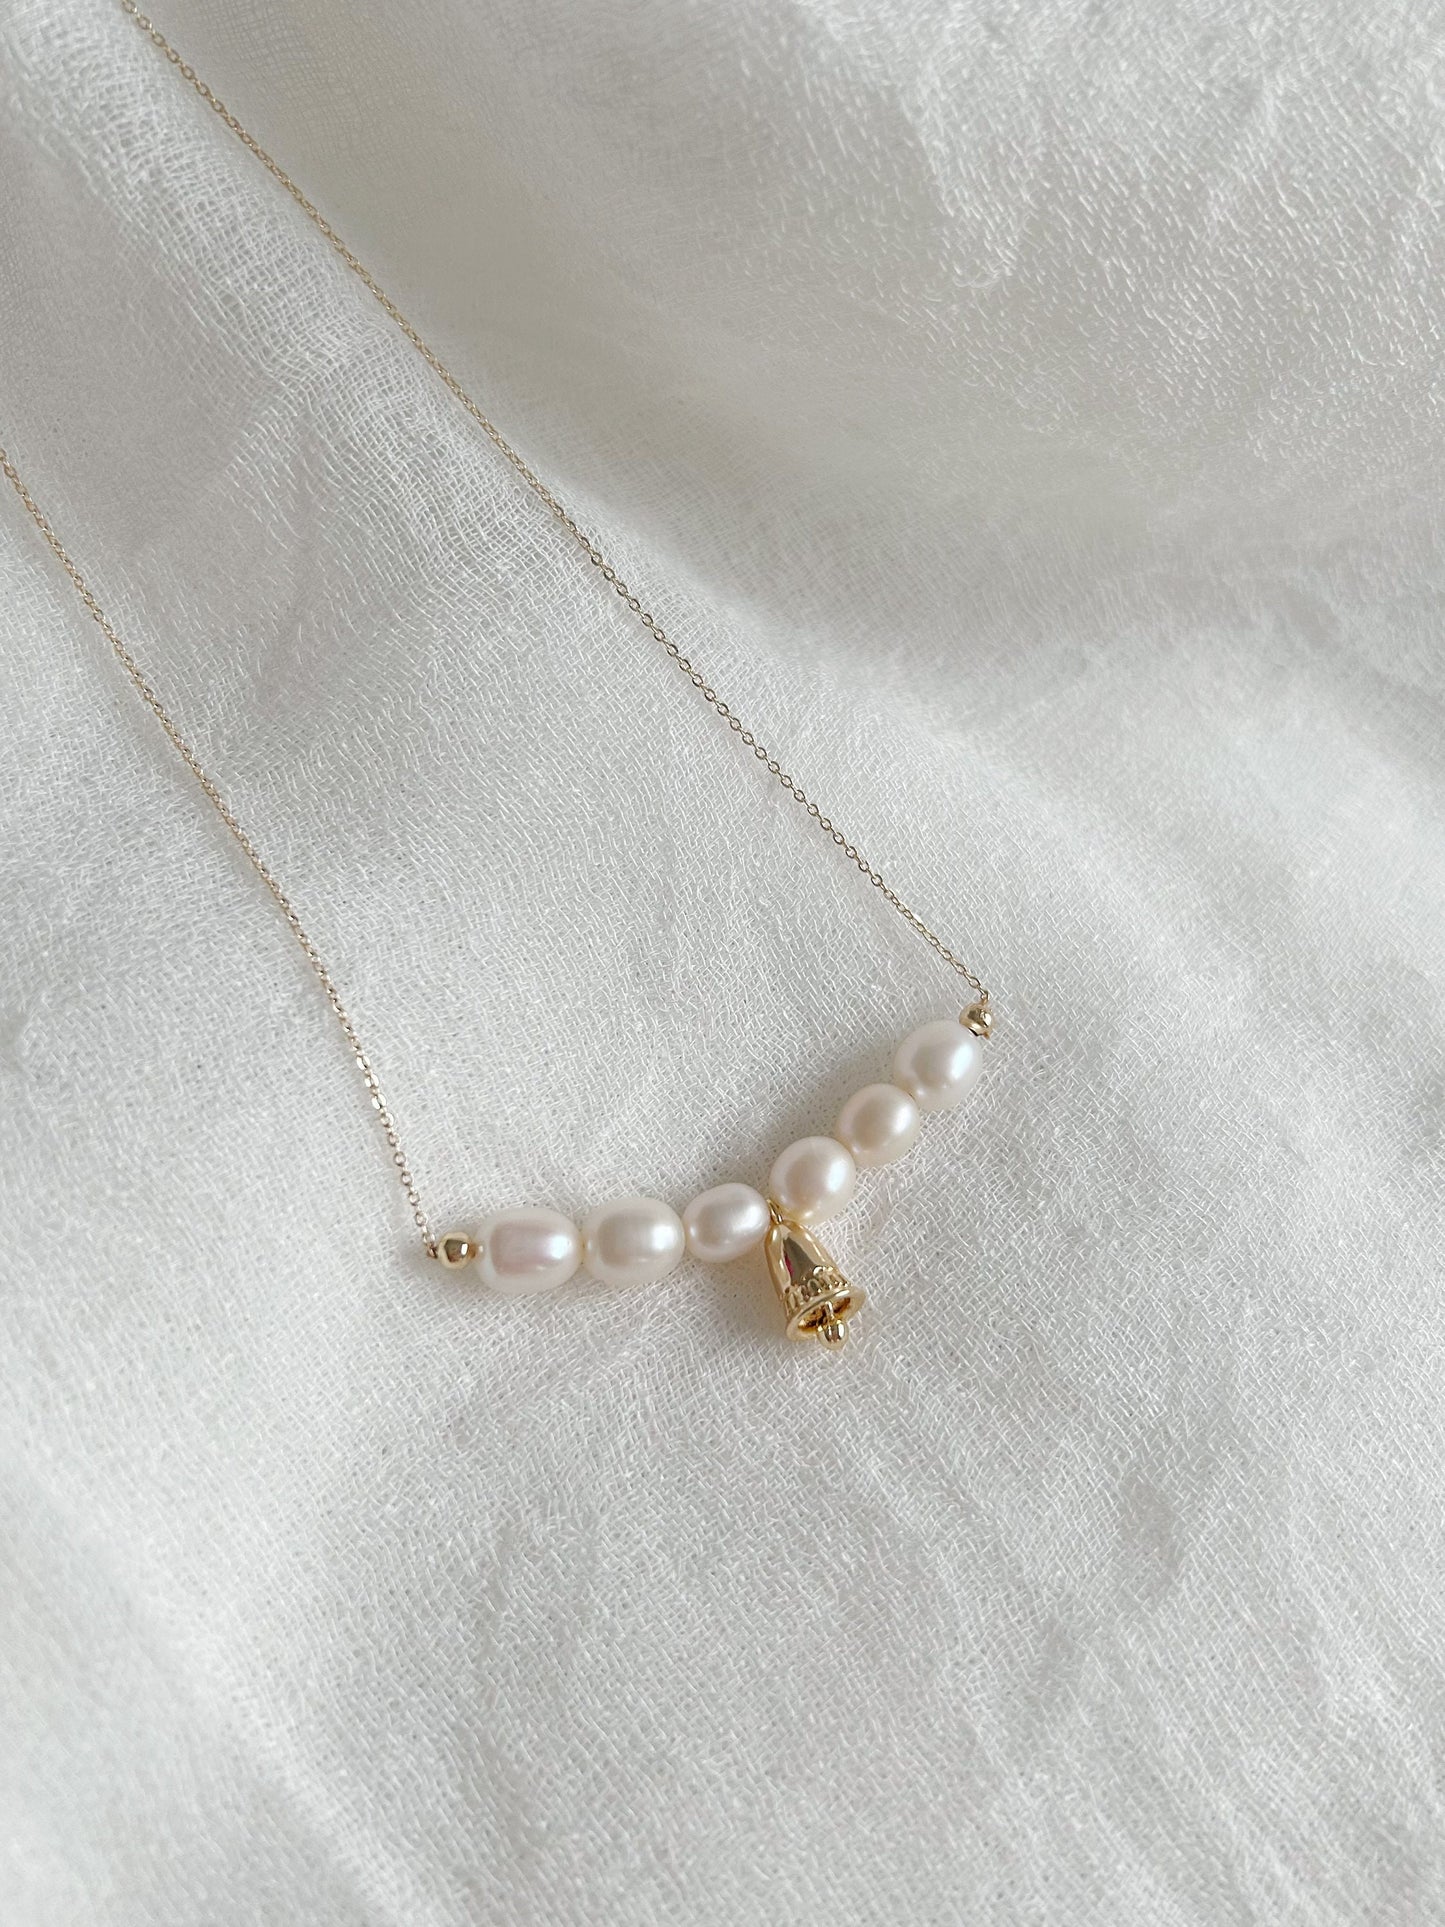 Freshwater pearl necklace, jingle bell pendant, Christmas special jewelry